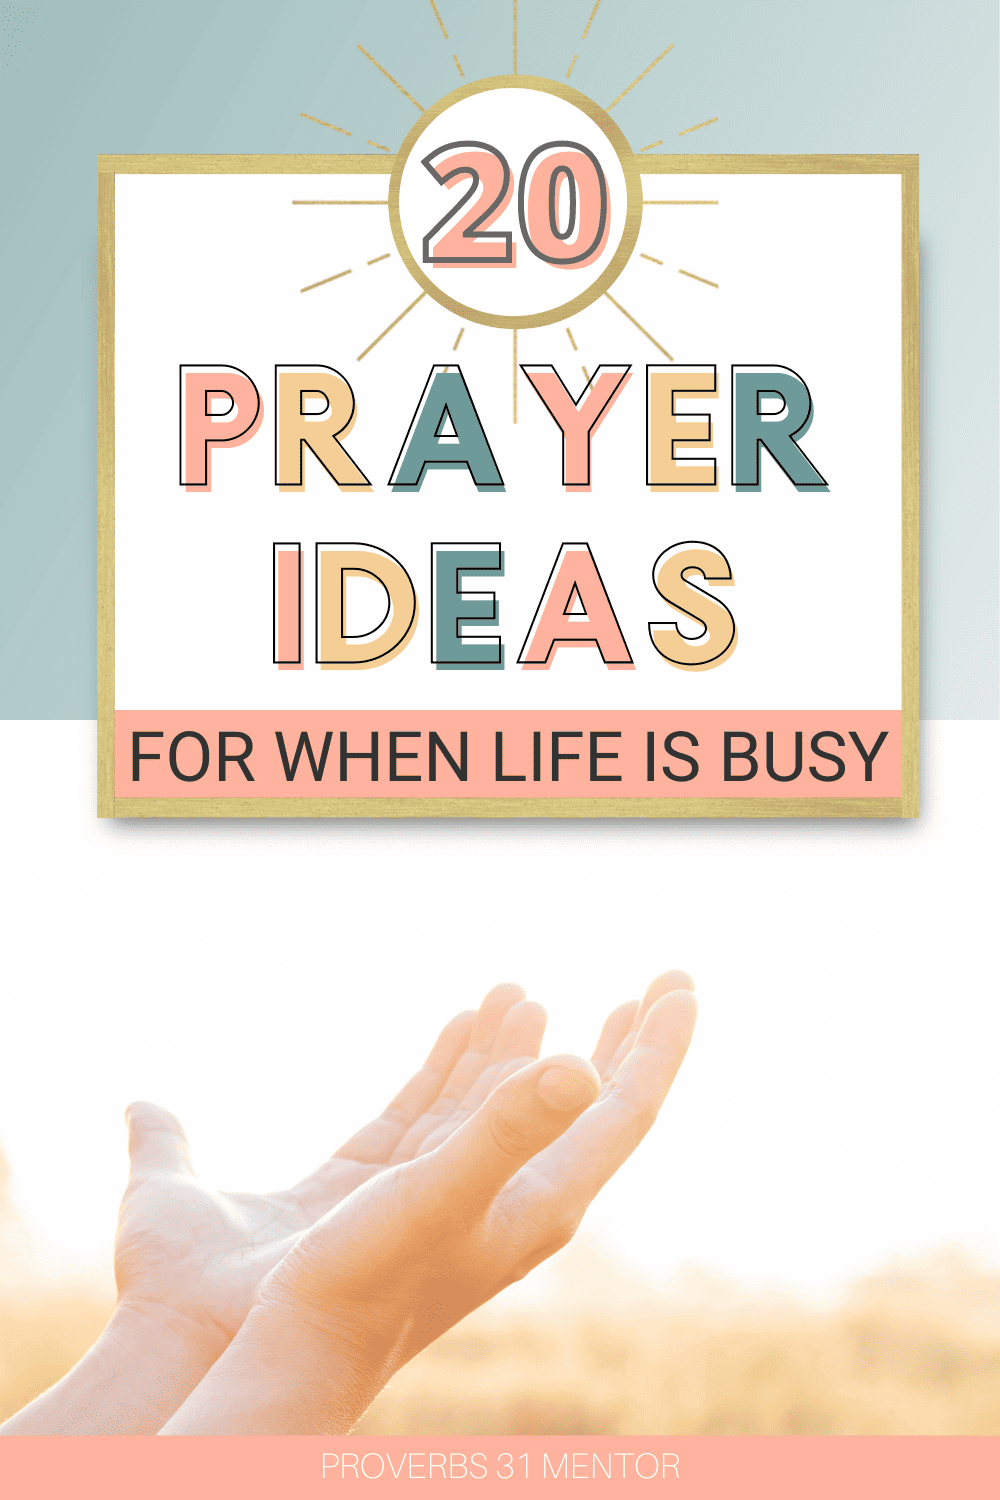 Title-20 Prayer Ideas for When Life is Busy Picture- Woman raising her hands to the sky in prayer